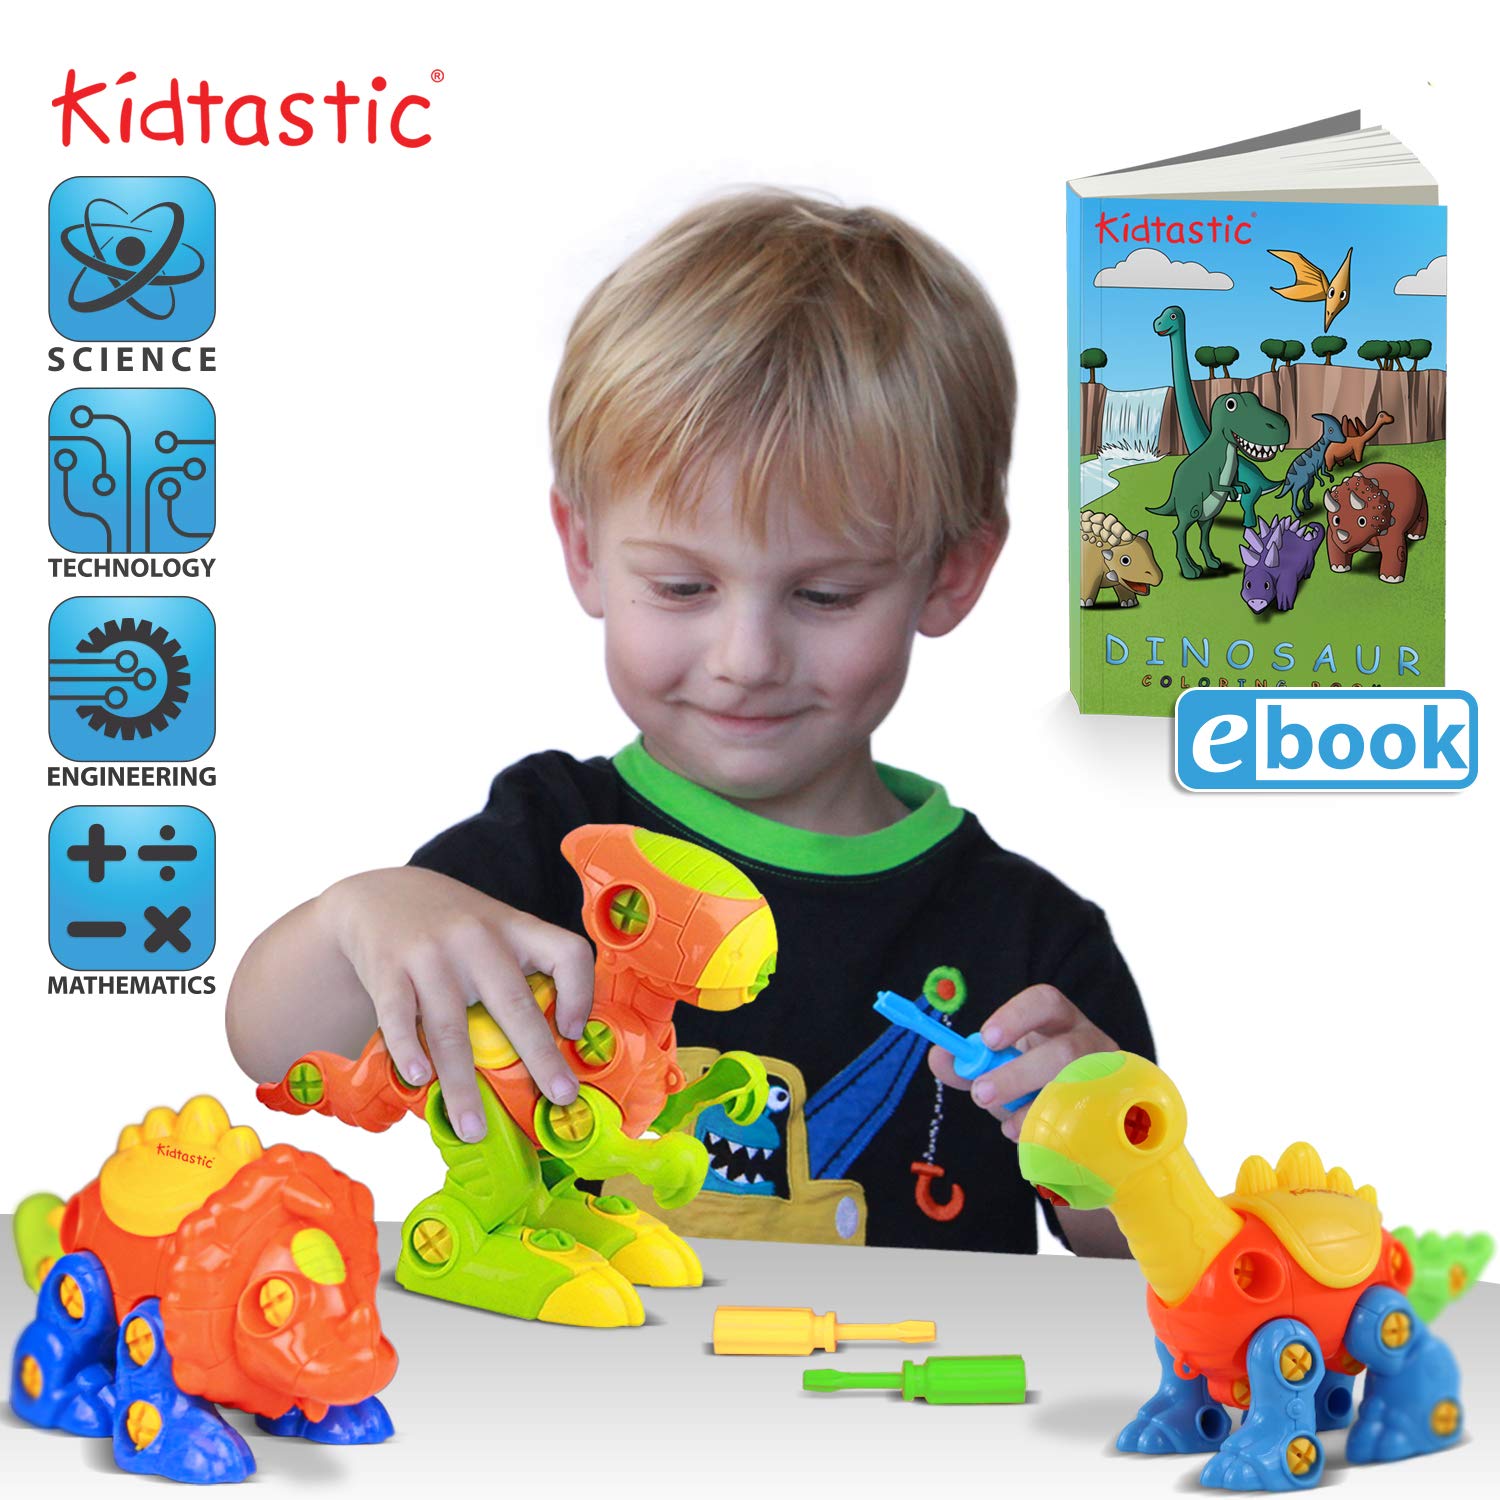 Kidtastic Dinosaur Toys, STEM Learning (106 pieces), Take Apart Fun (Pack of 3), Construction Engineering Building Play Set For Boys Girls Toddlers, Best Toy Gift Kids Ages 3yr – 6yr, 3 Years and Up